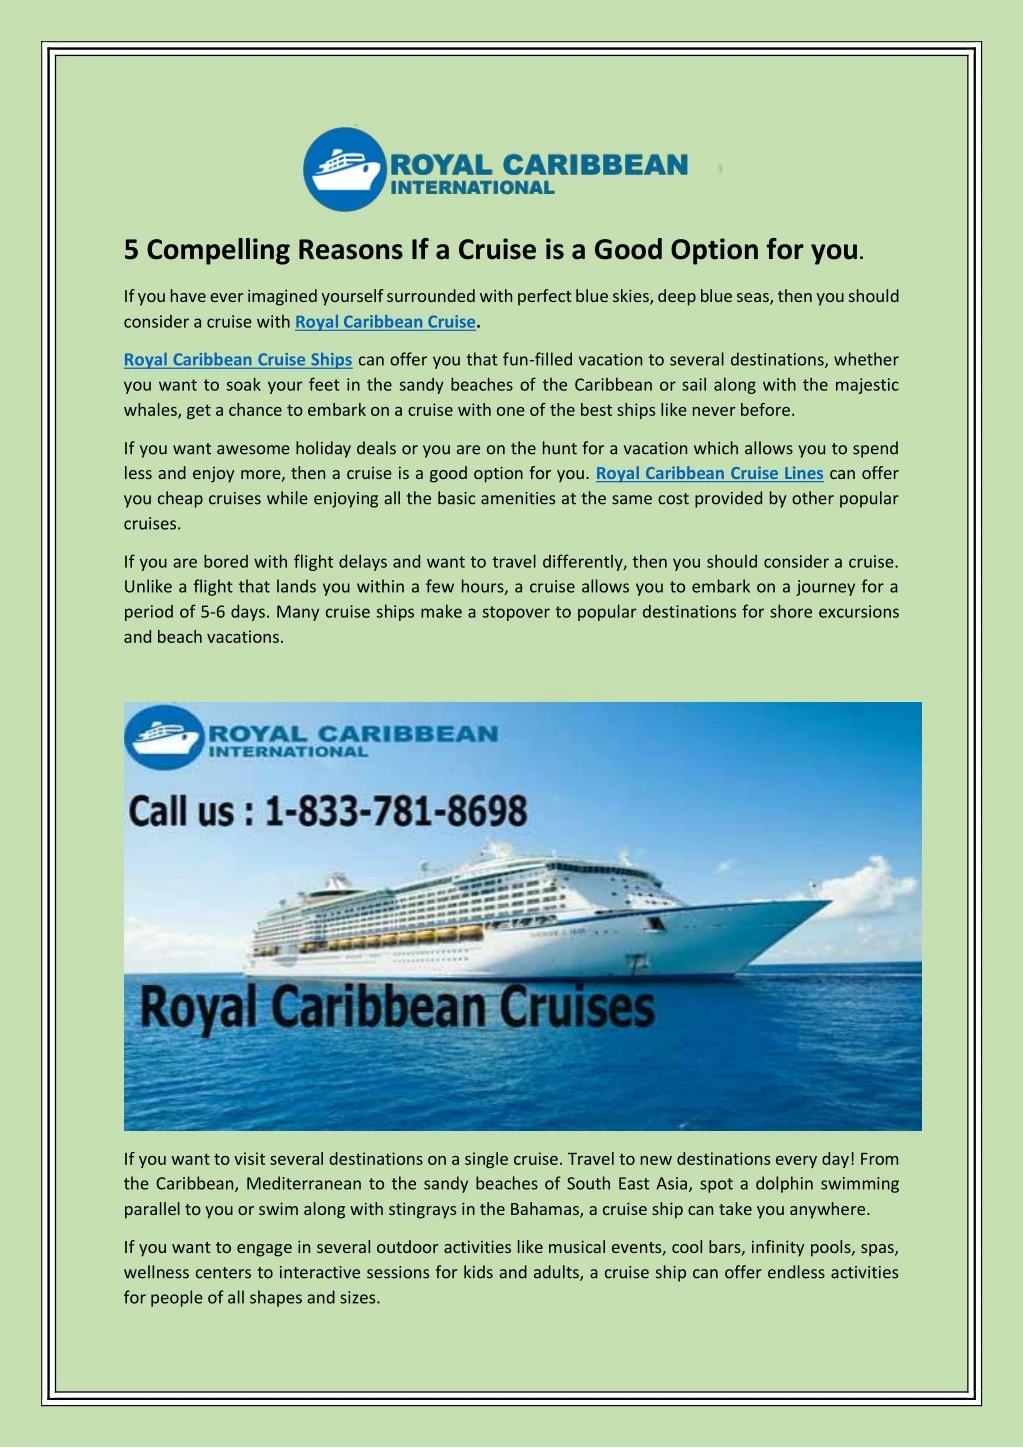 5 compelling reasons if a cruise is a good option